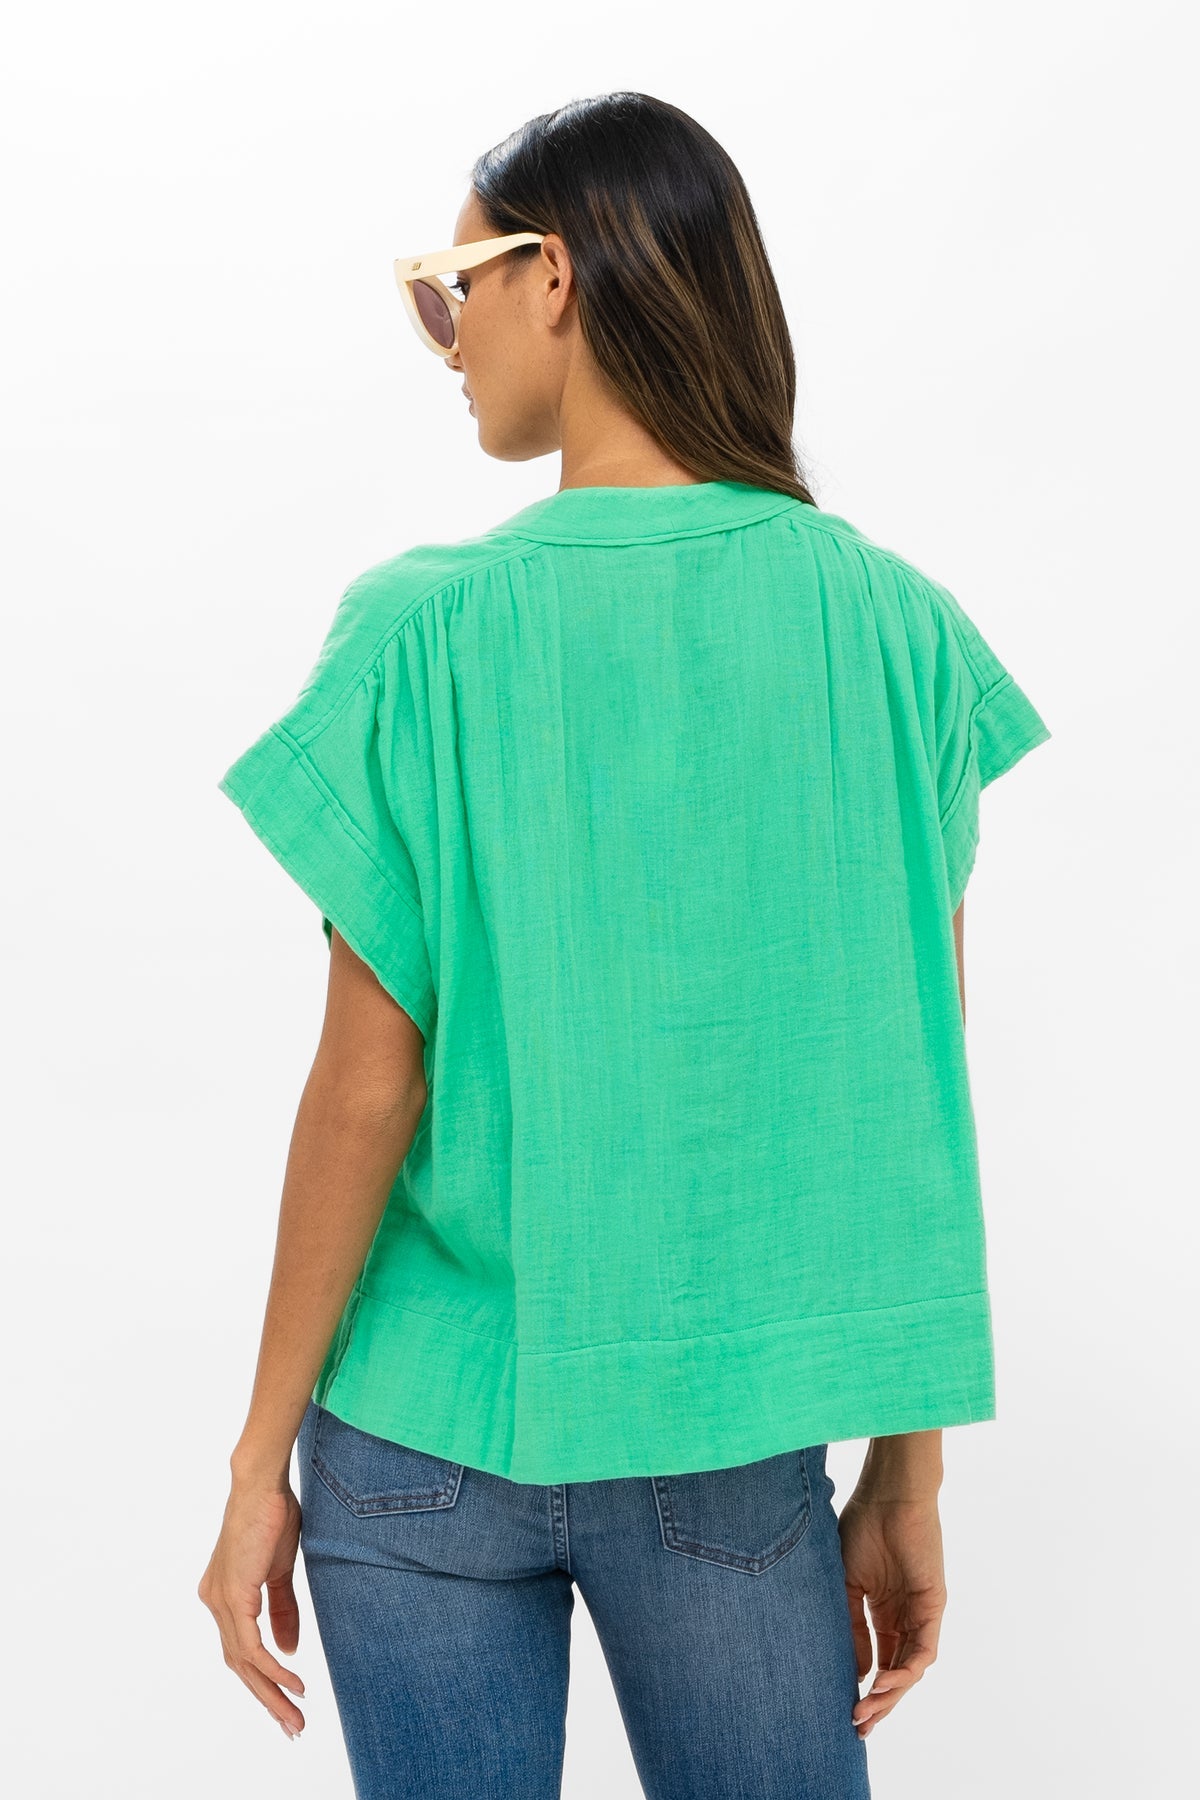 Rolled Sleeve Top in Bahama Green